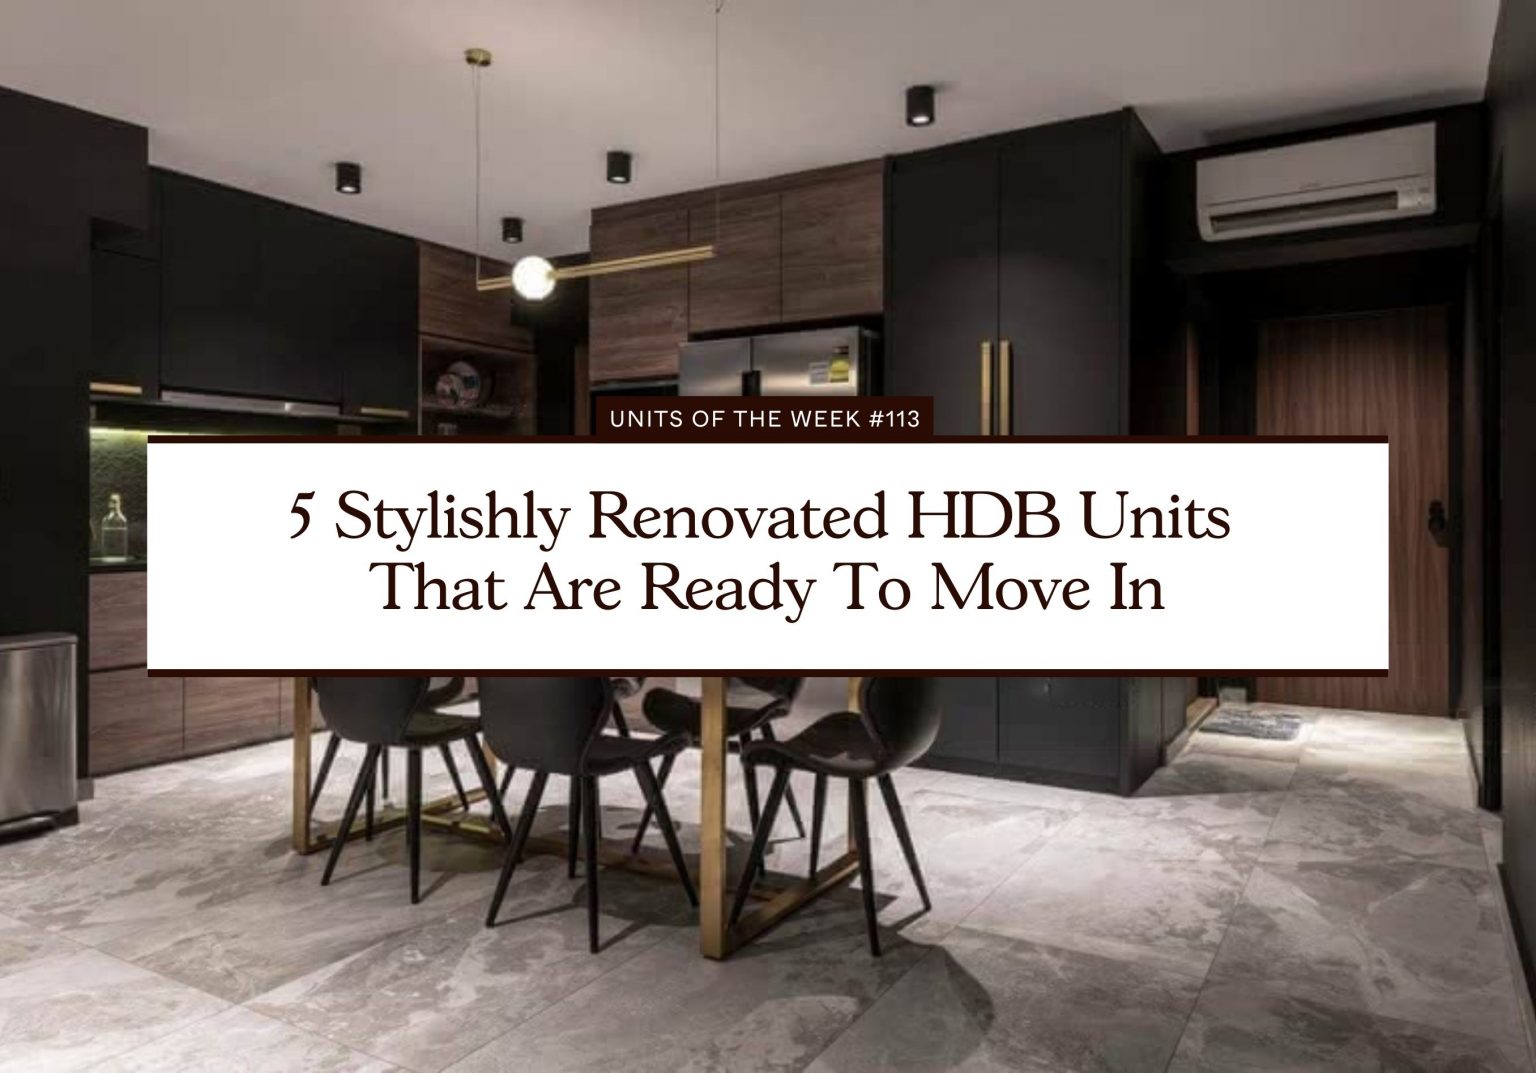 5 Stylishly Renovated HDB Units That Are Ready To Move In